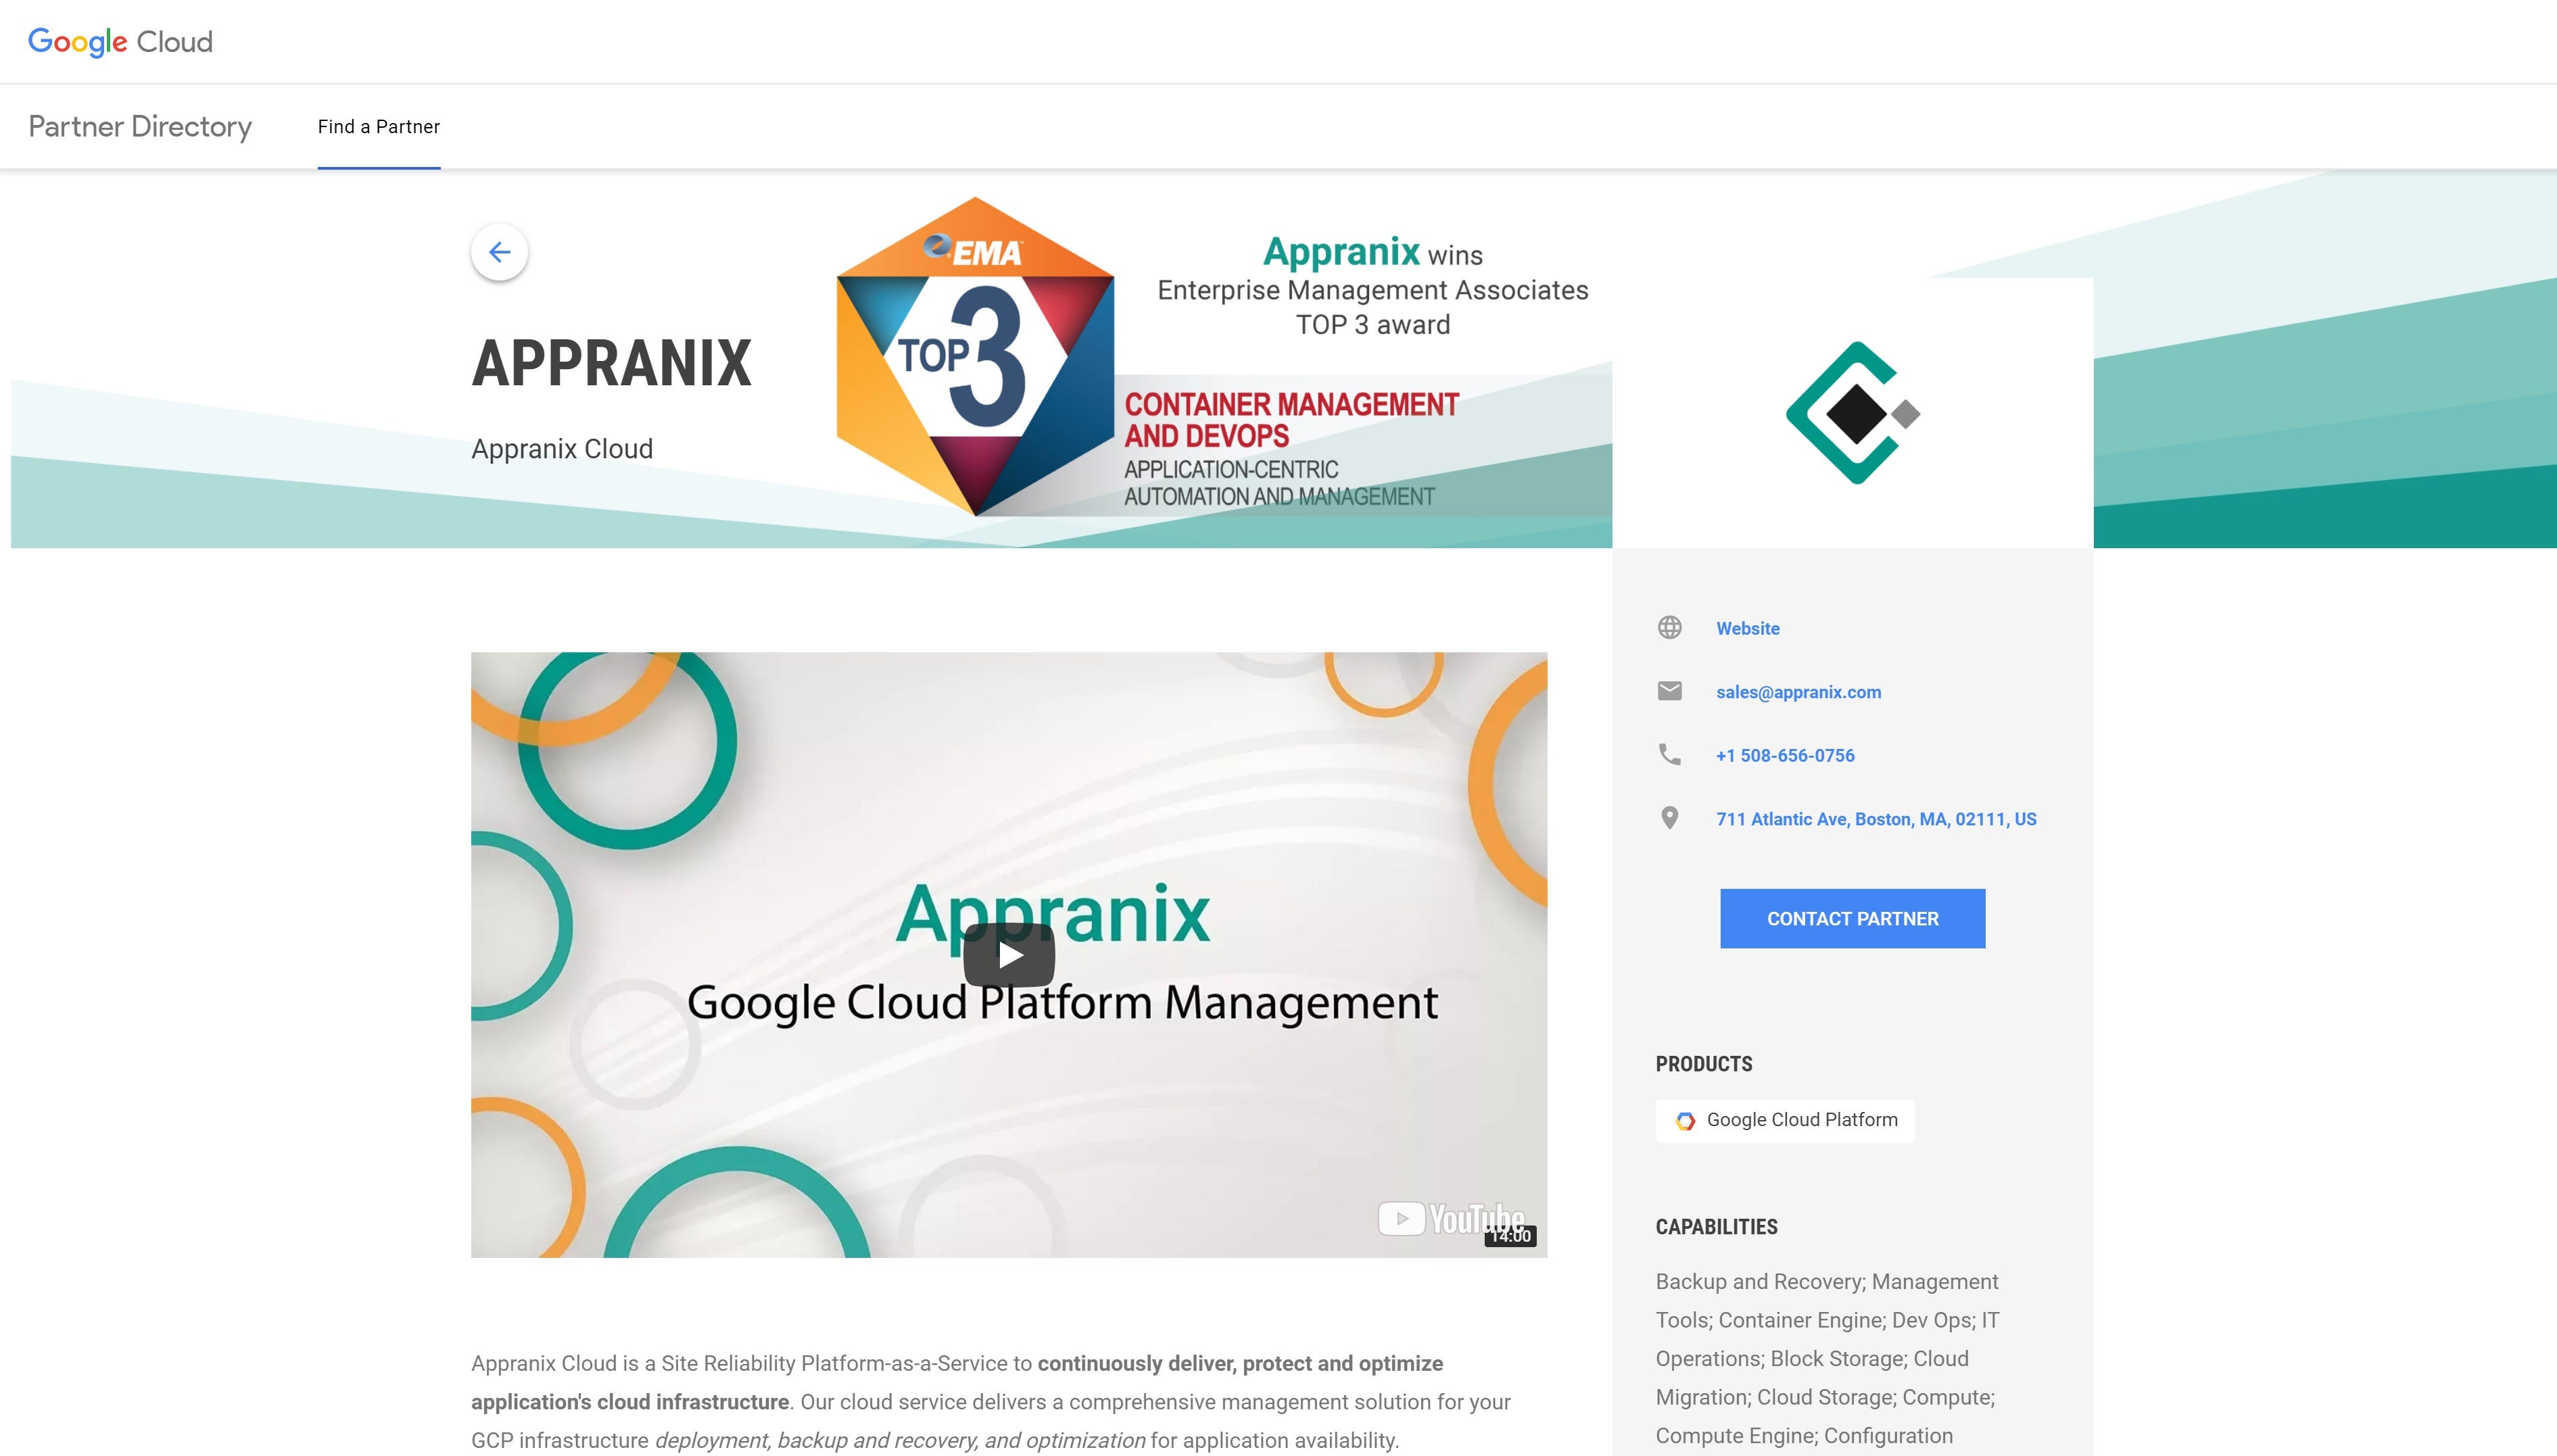 Appranix Site Reliability PaaS is now on the Google Cloud Marketplace